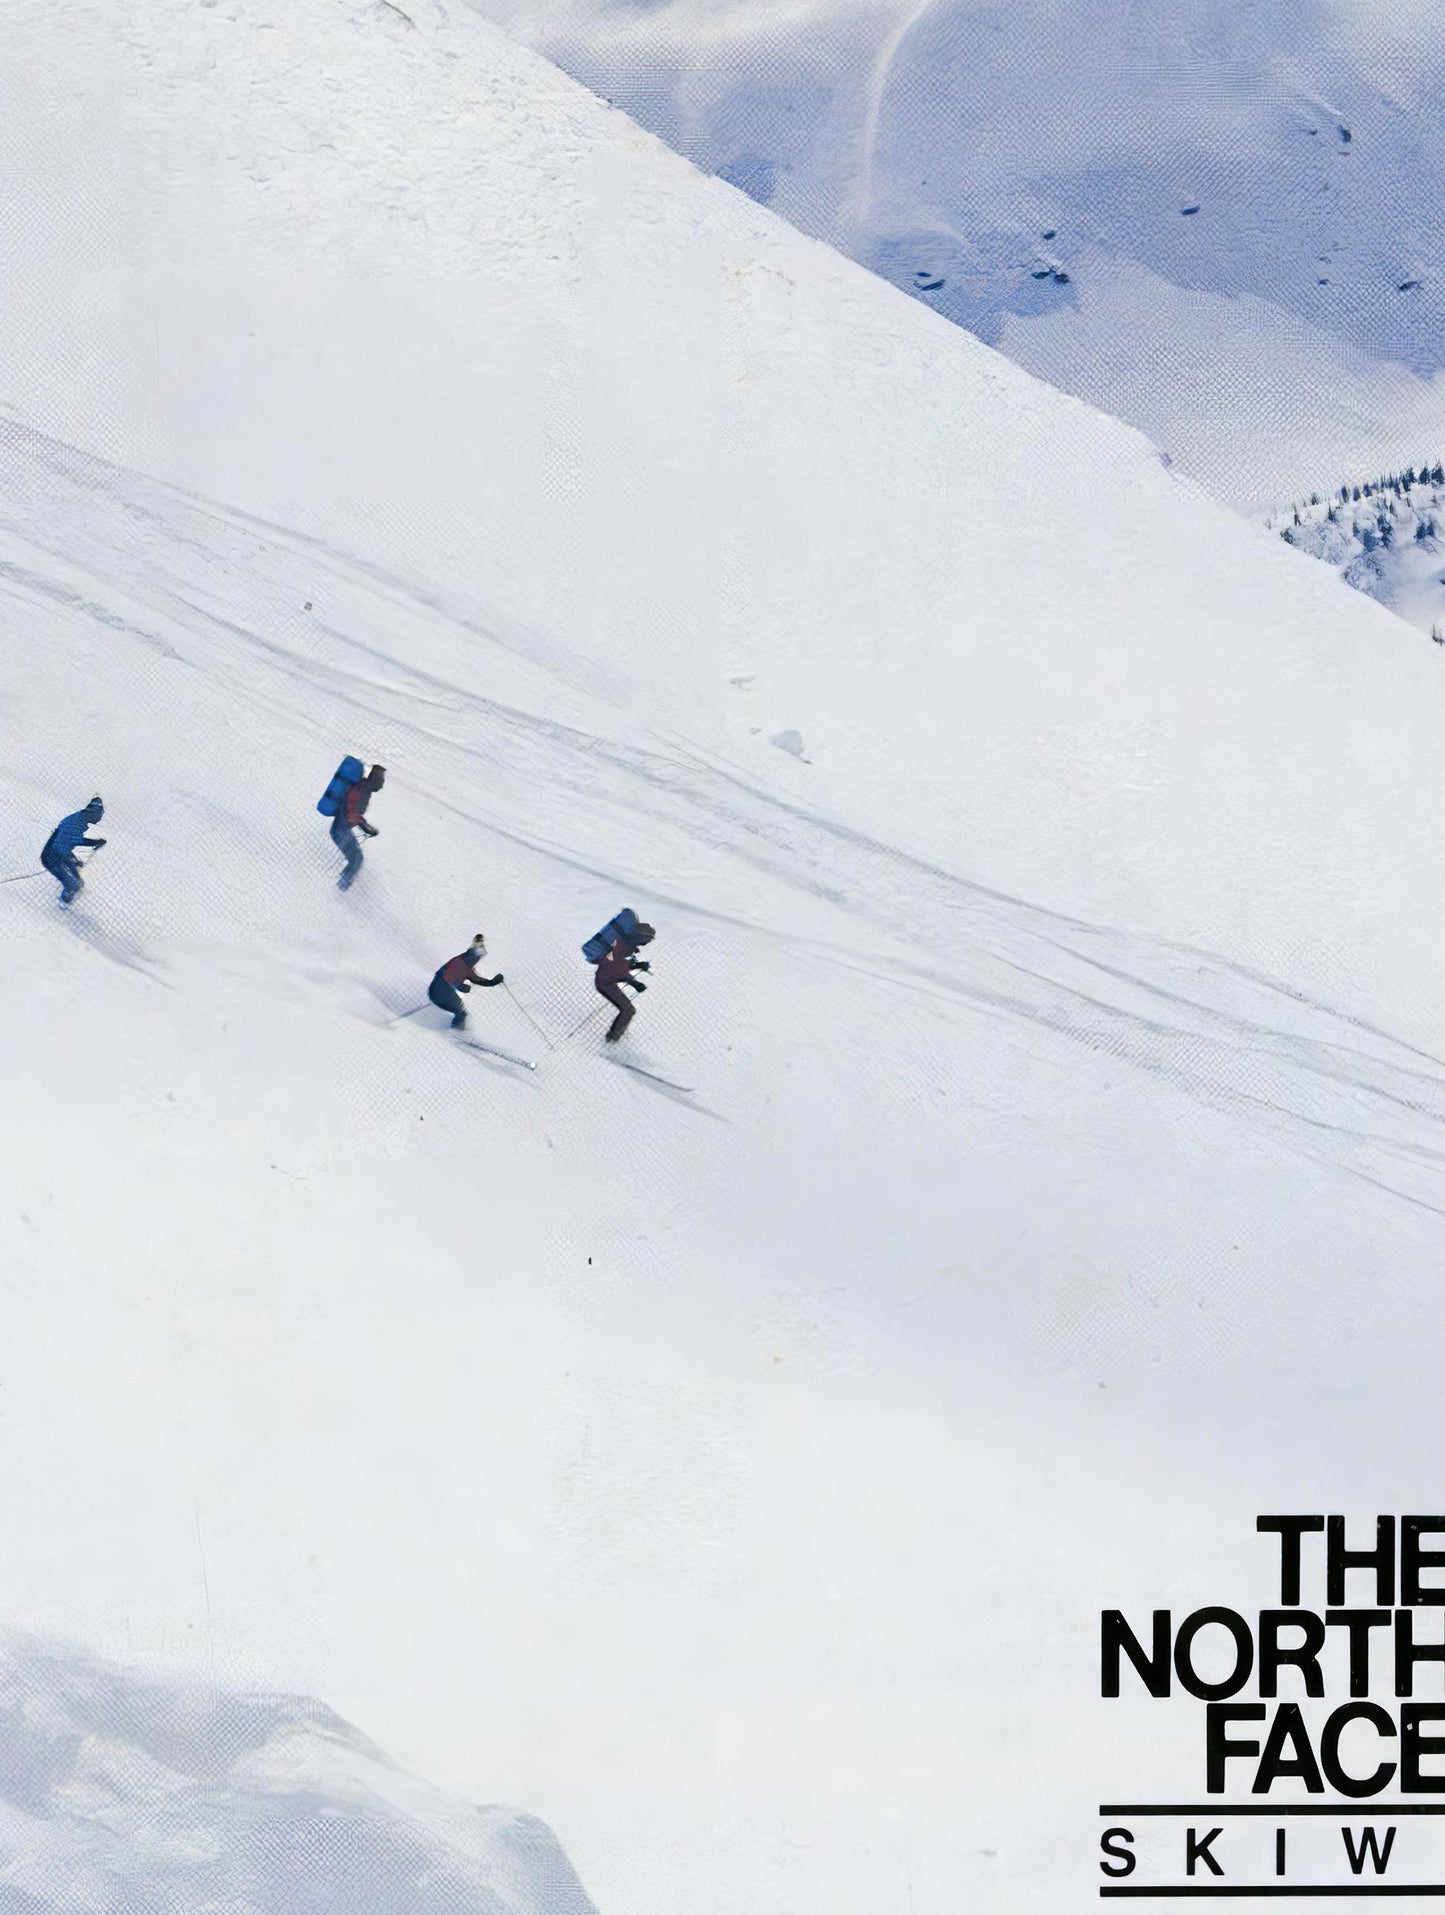 The North Face 1983-1984 Winter Magazine Front Cover Poster